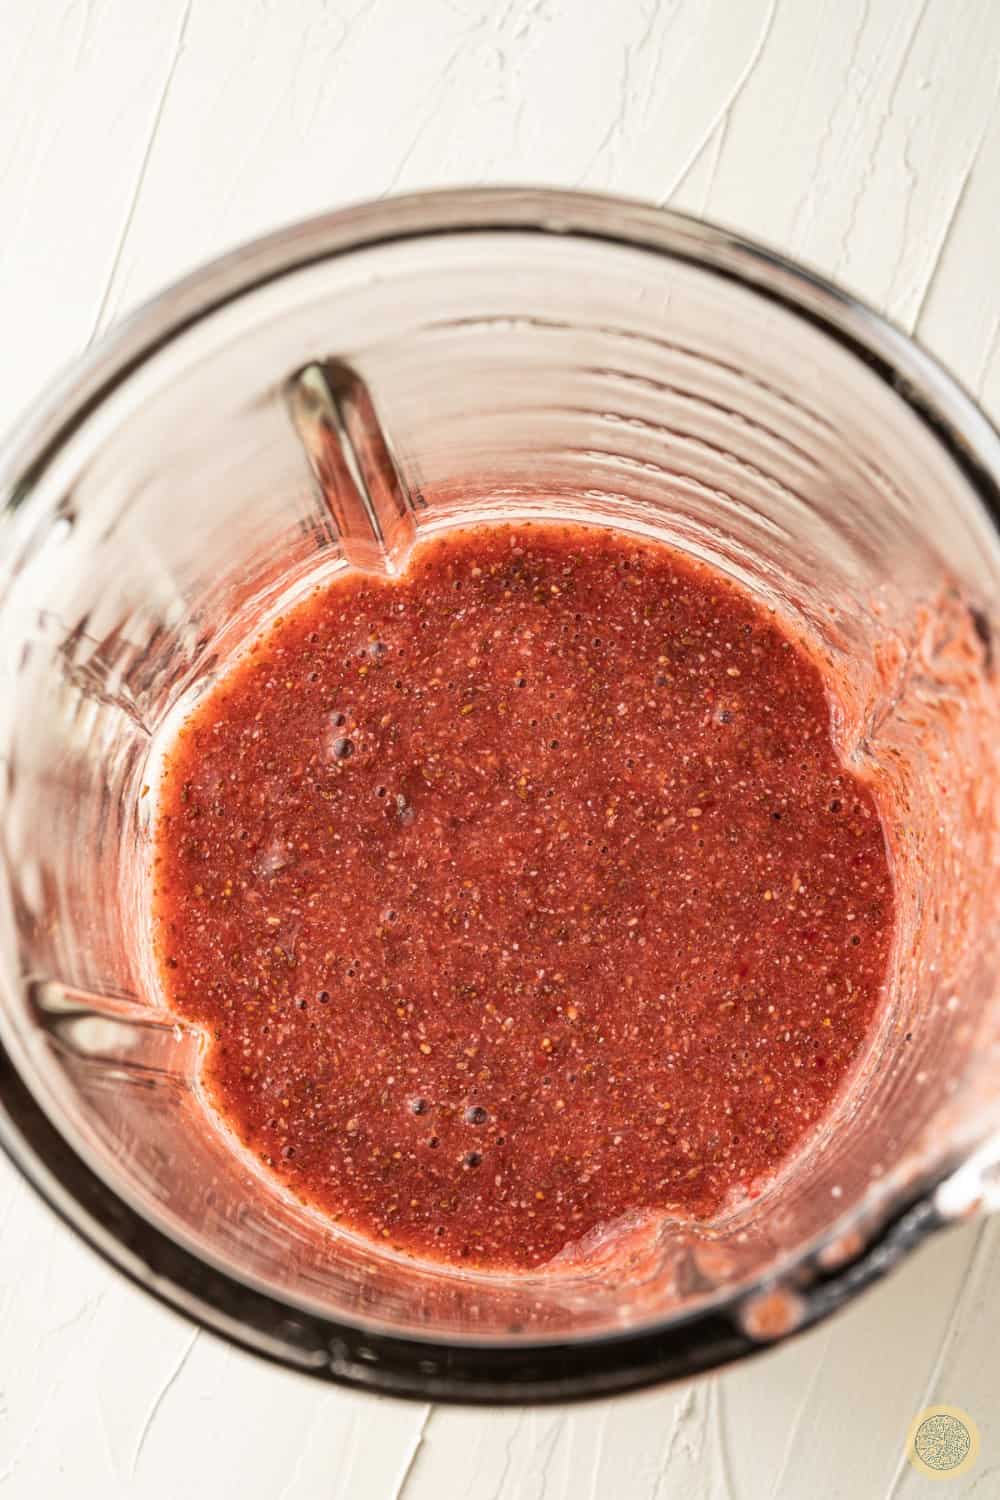 strawberry and chia seeds blending process